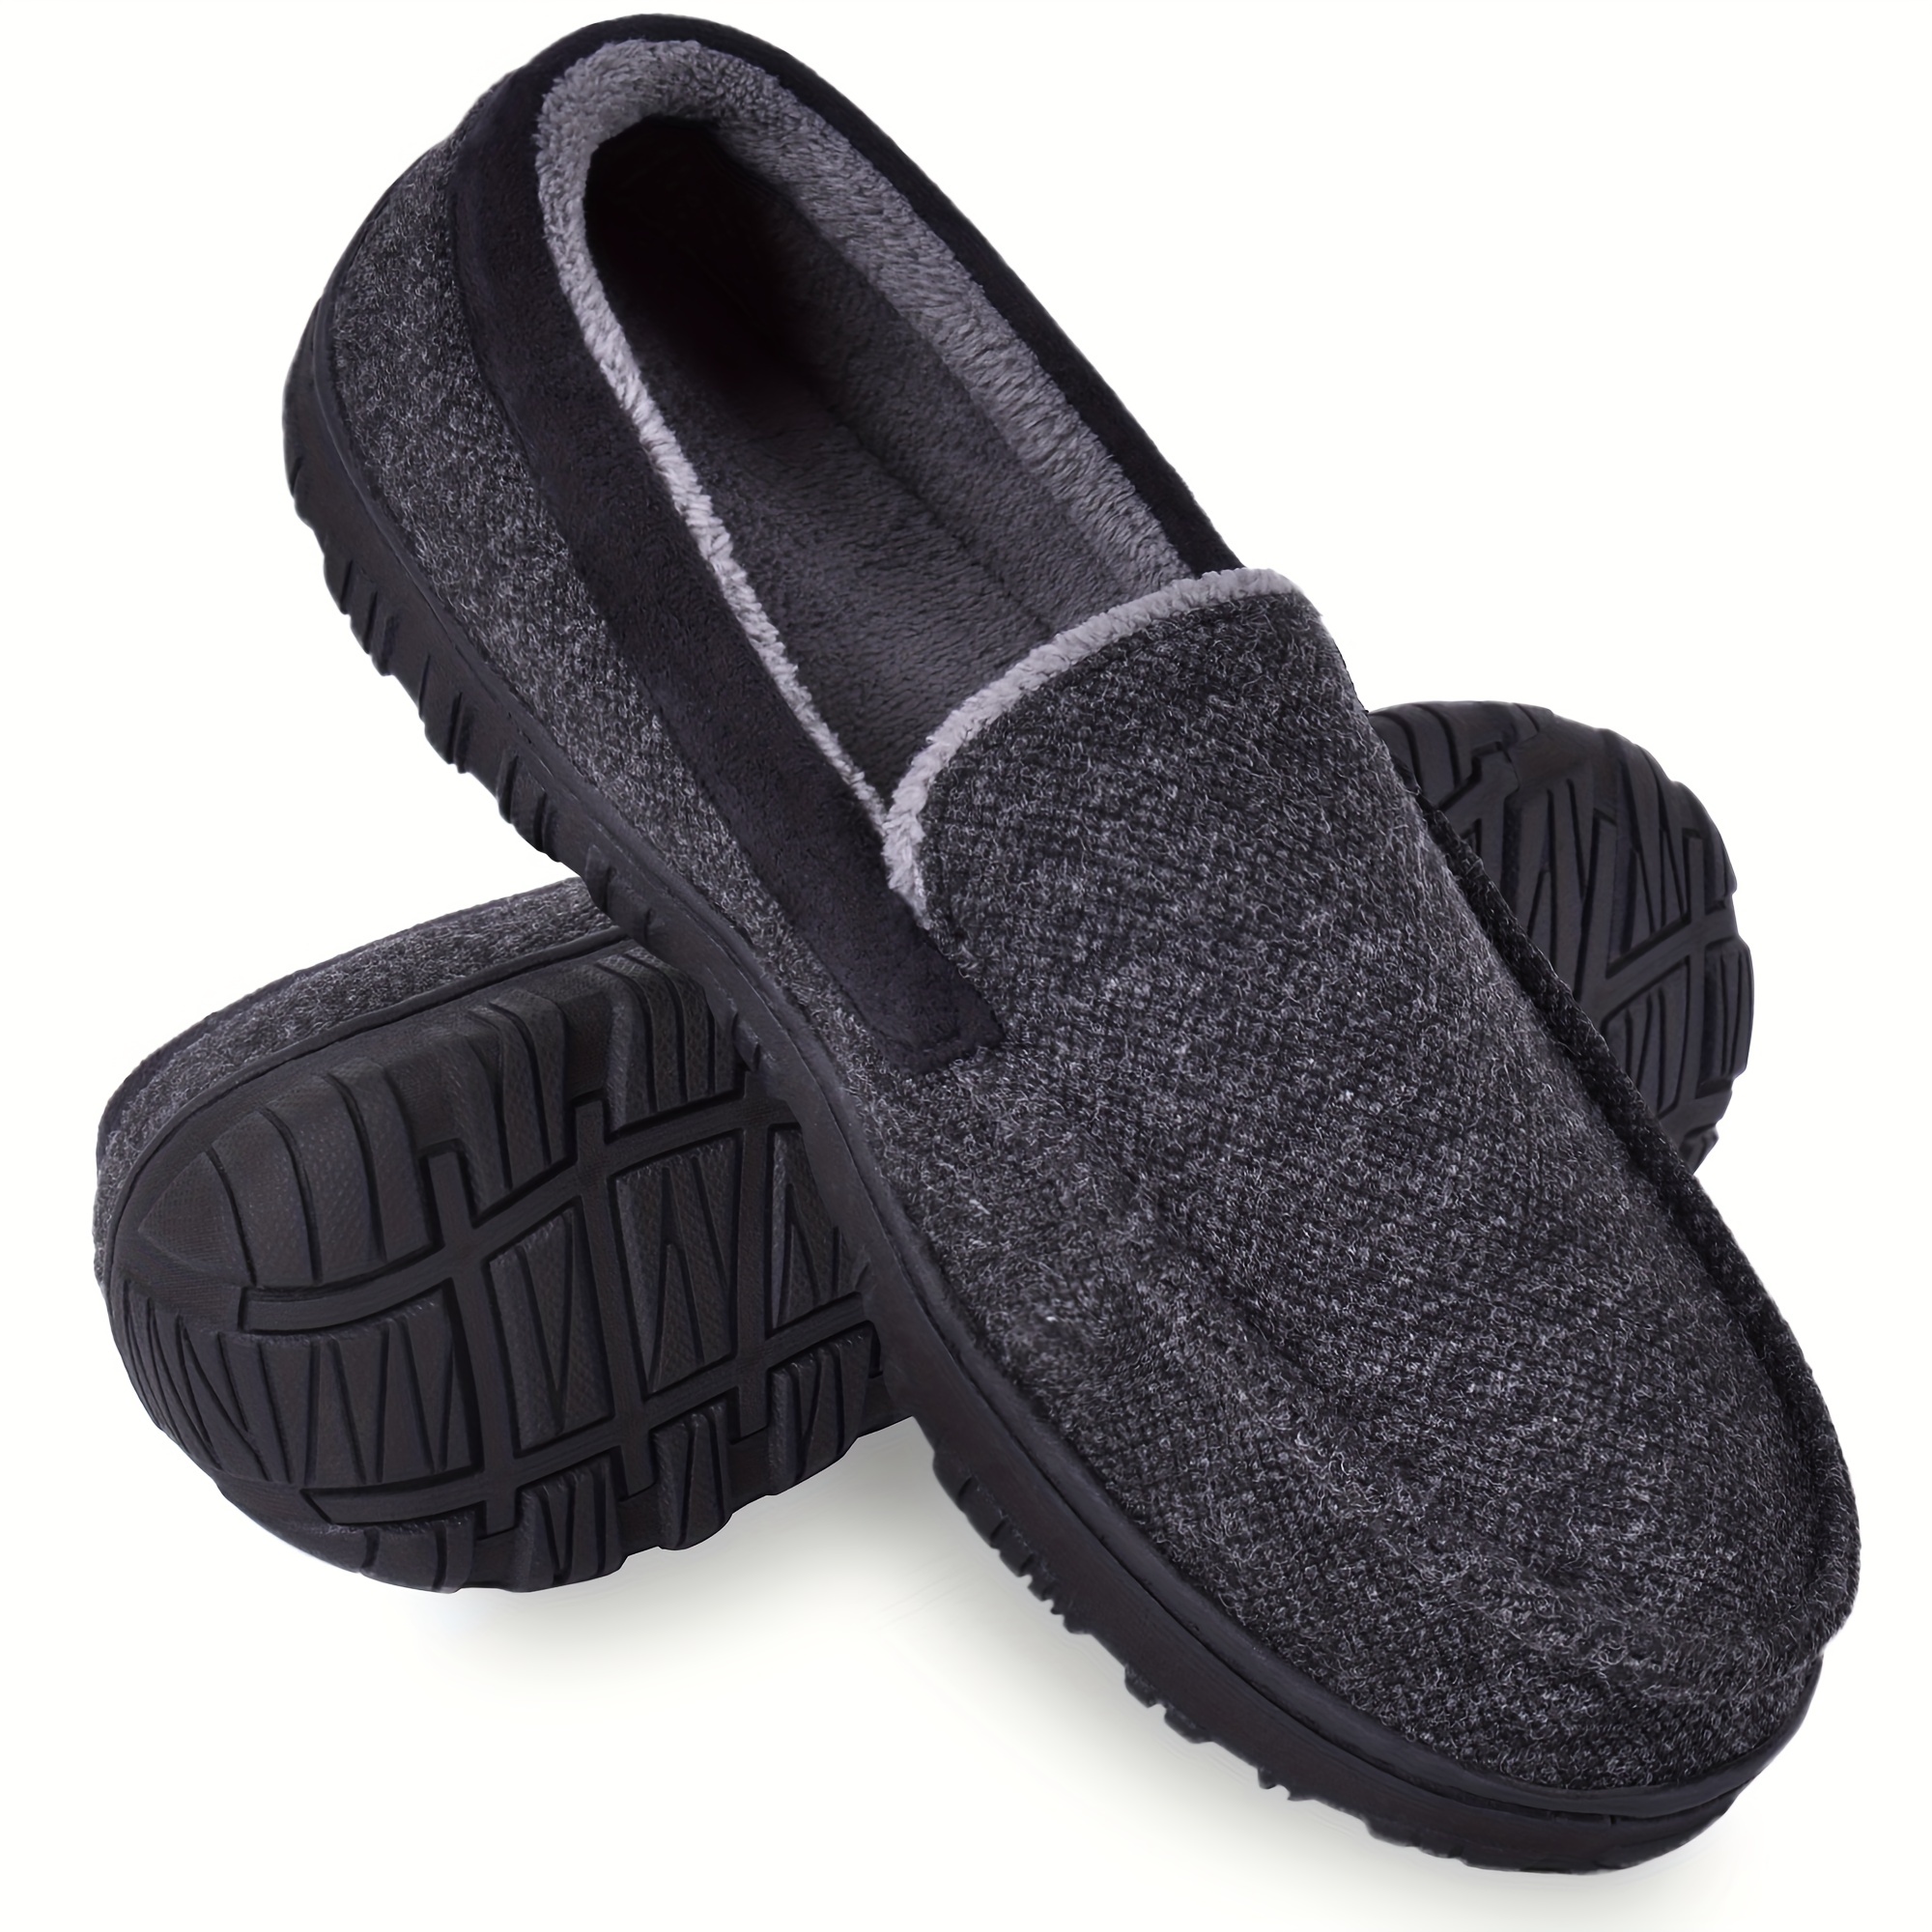 Mens Fuzzy Fleece Slippers With Memory Foam Warm House Shoes For